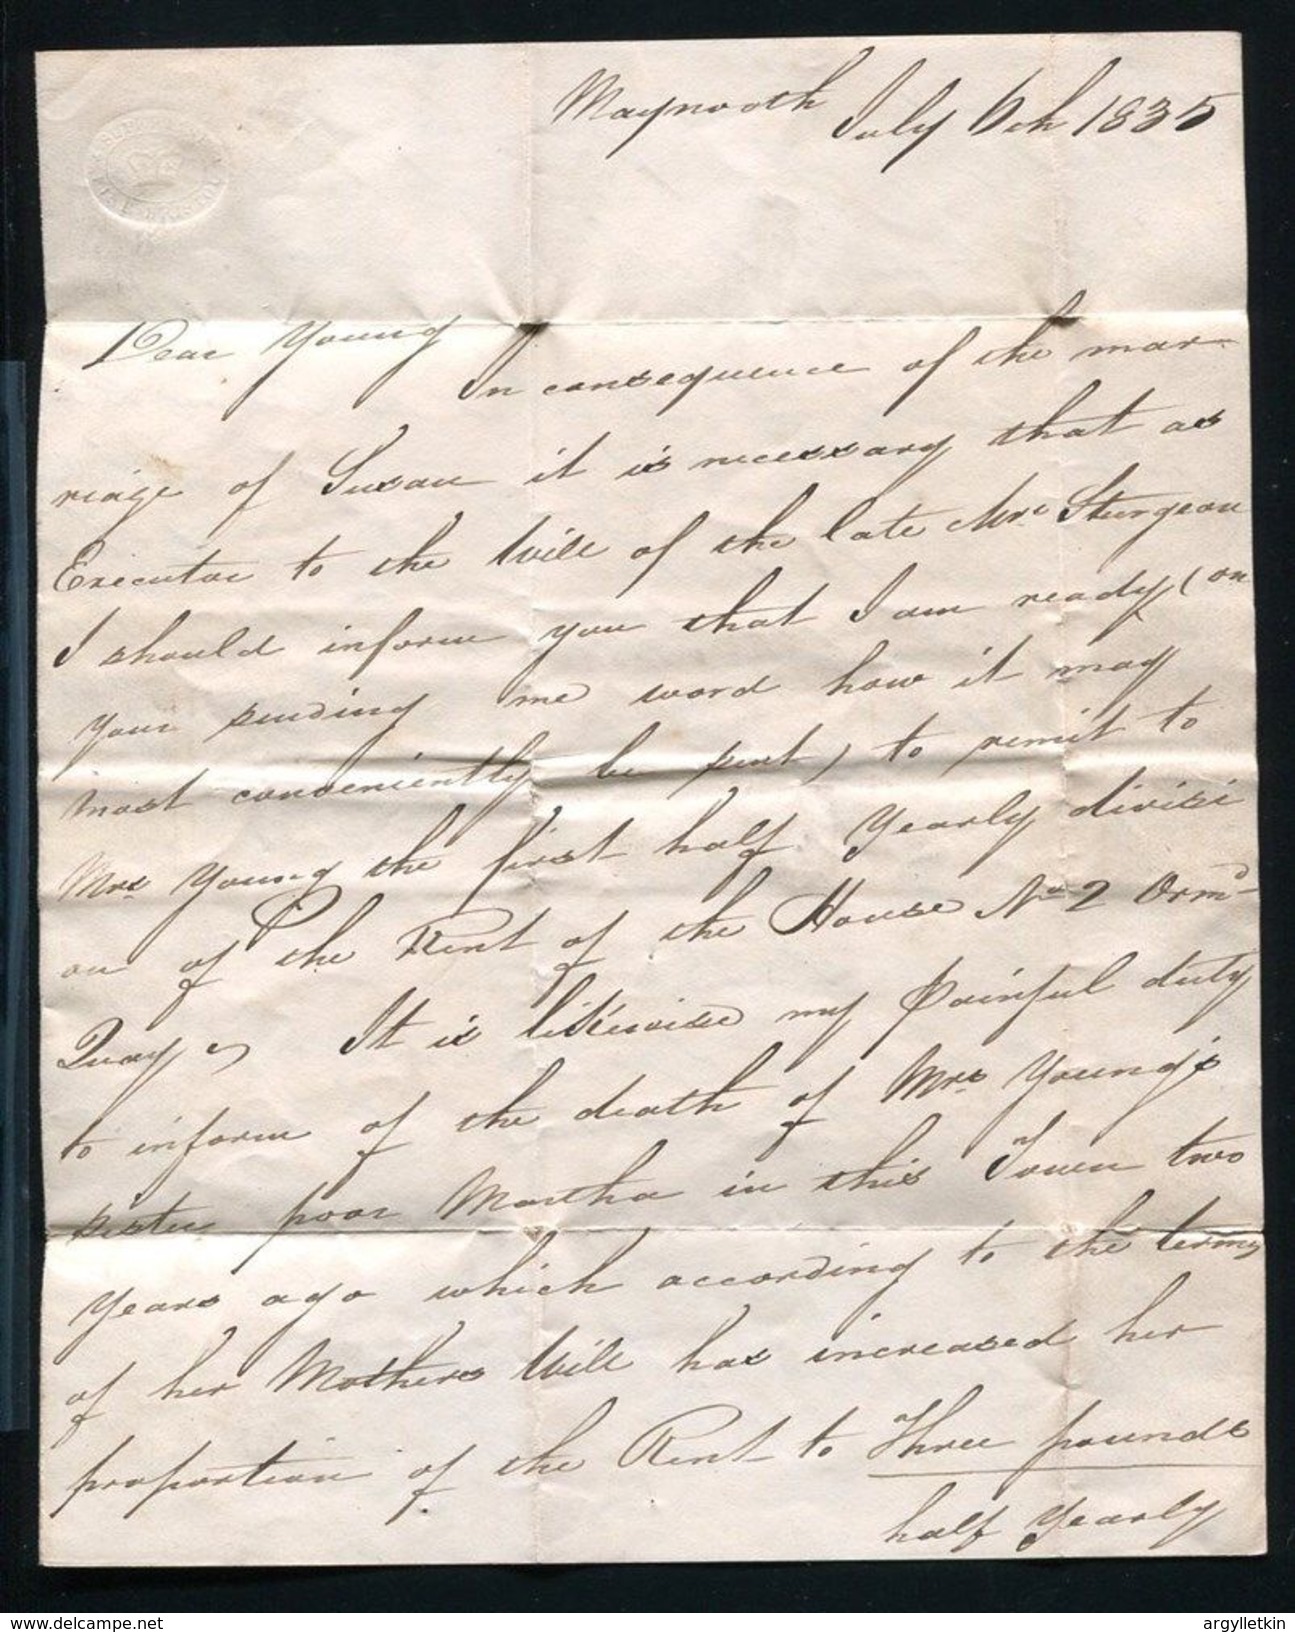 IRELAND SOLDIERS LETTER MAYNOOTH KILDARE 1835 CONCESSION RATE - Prephilately